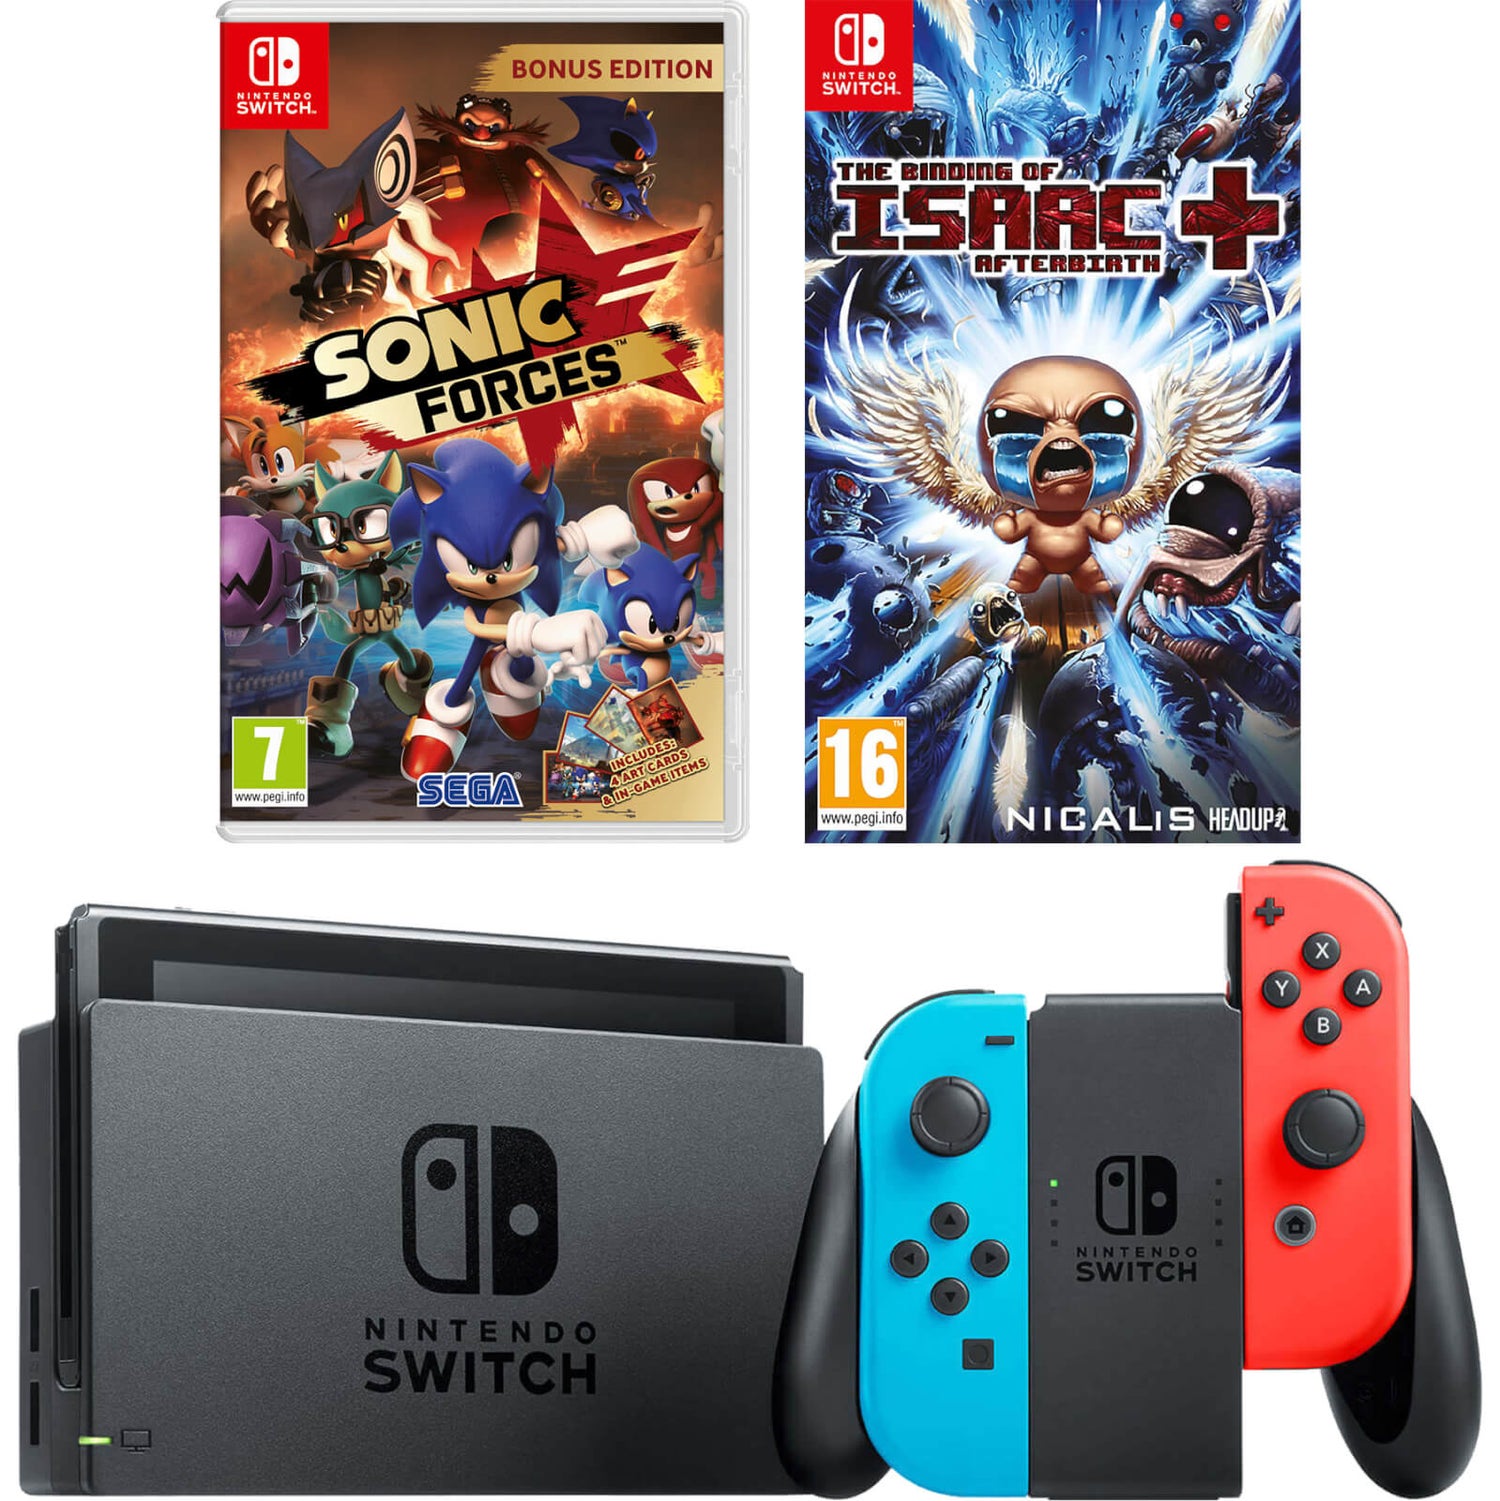  Sonic Forces (Nintendo Switch) : Video Games